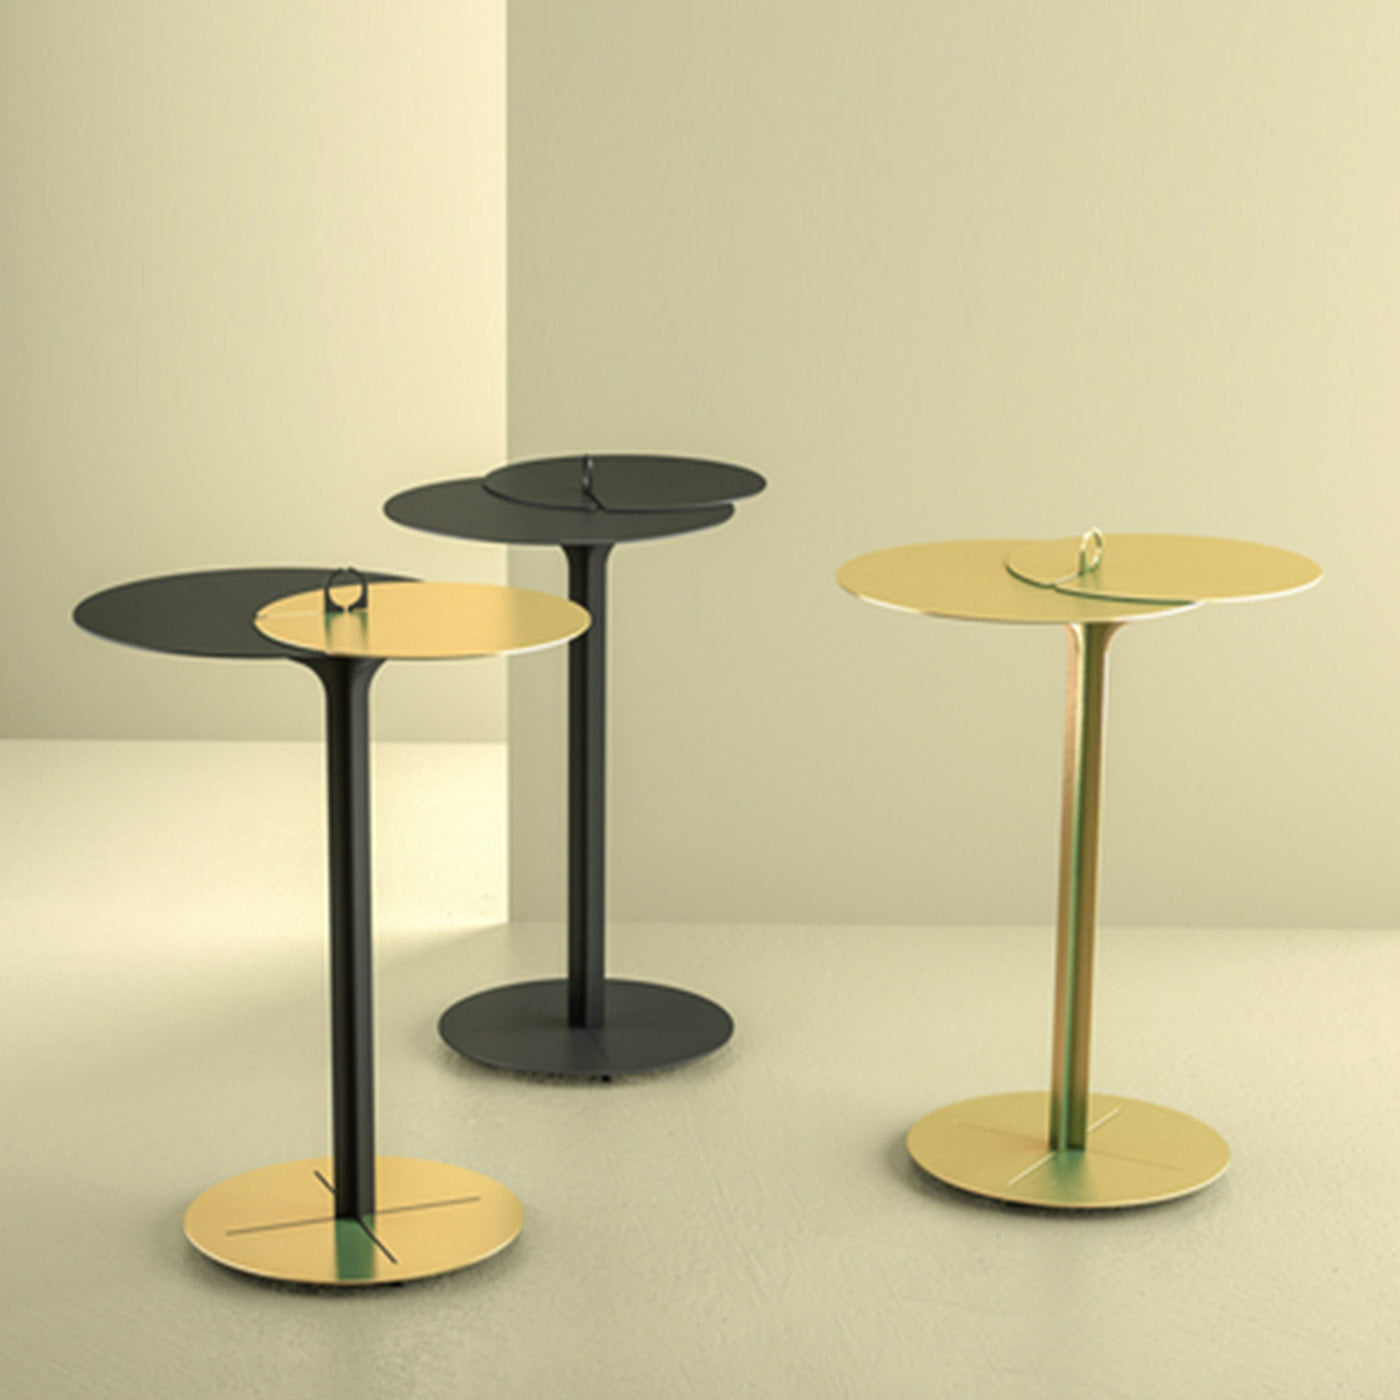 ED021 Black and Brass Side Table - Alternative view 3